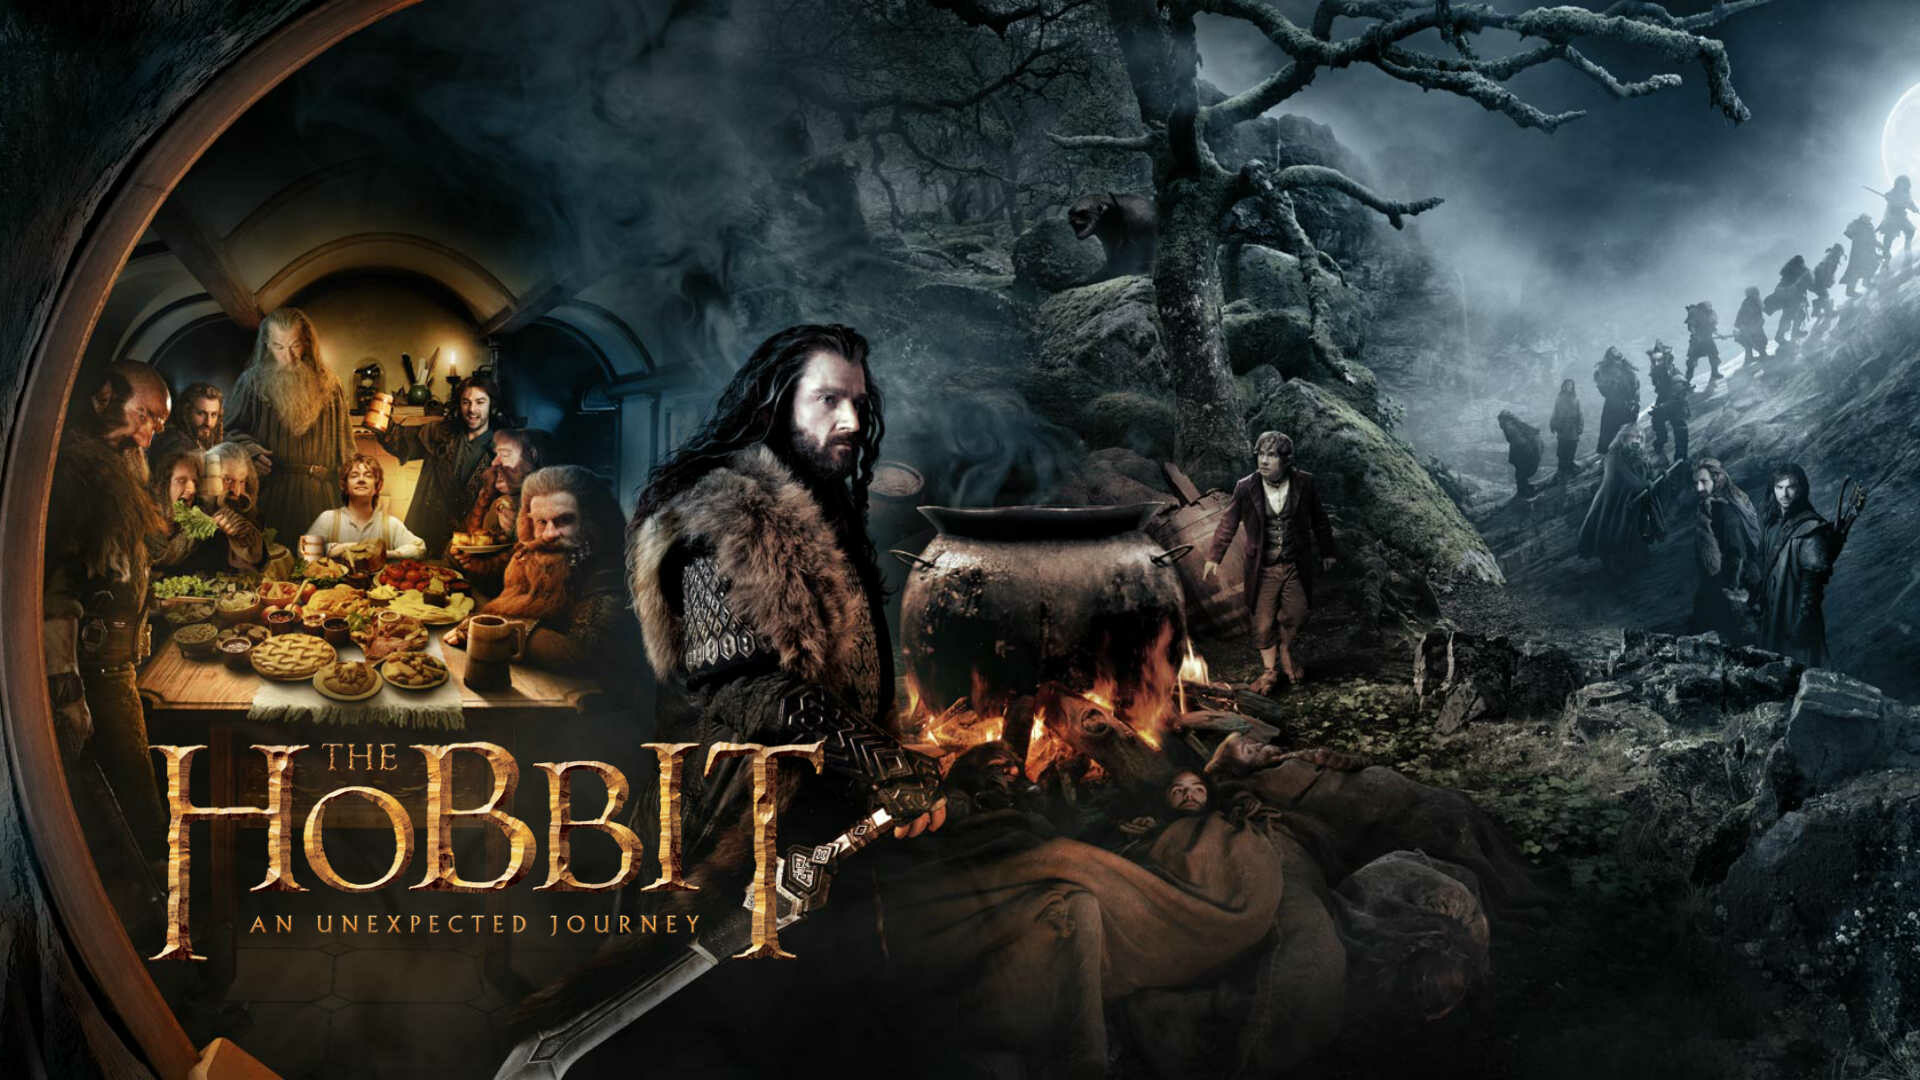 The Hobbit: An Unexpected Journey, The first installment in the trilogy, acting as a prequel to Jackson's The Lord of the Rings. 1920x1080 Full HD Wallpaper.